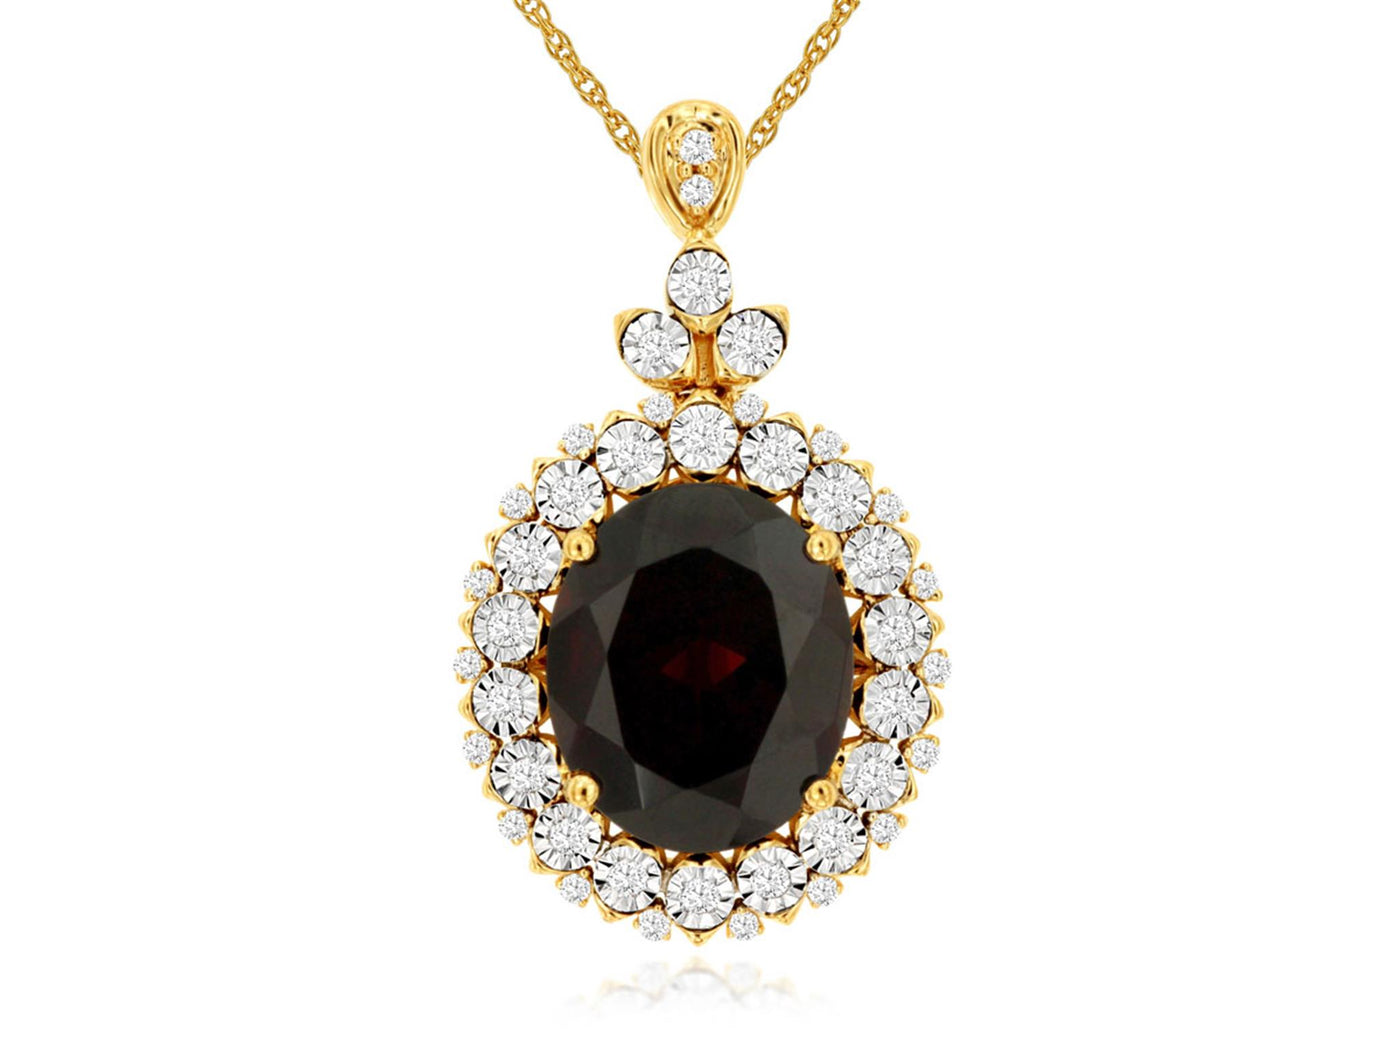 14K Yellow Gold 5.75ctw Halo Style Garnet Necklace